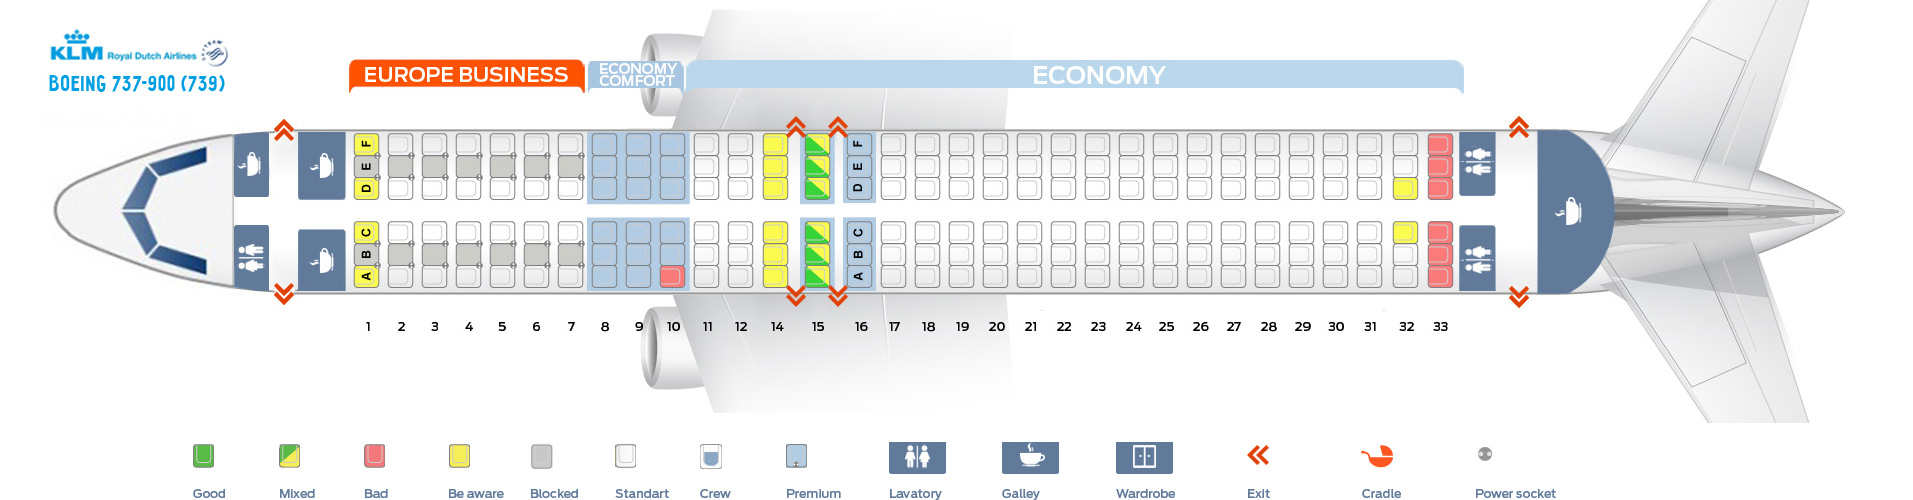 Seat Map Boeing 737 900 Klm Best Seats In The Plane